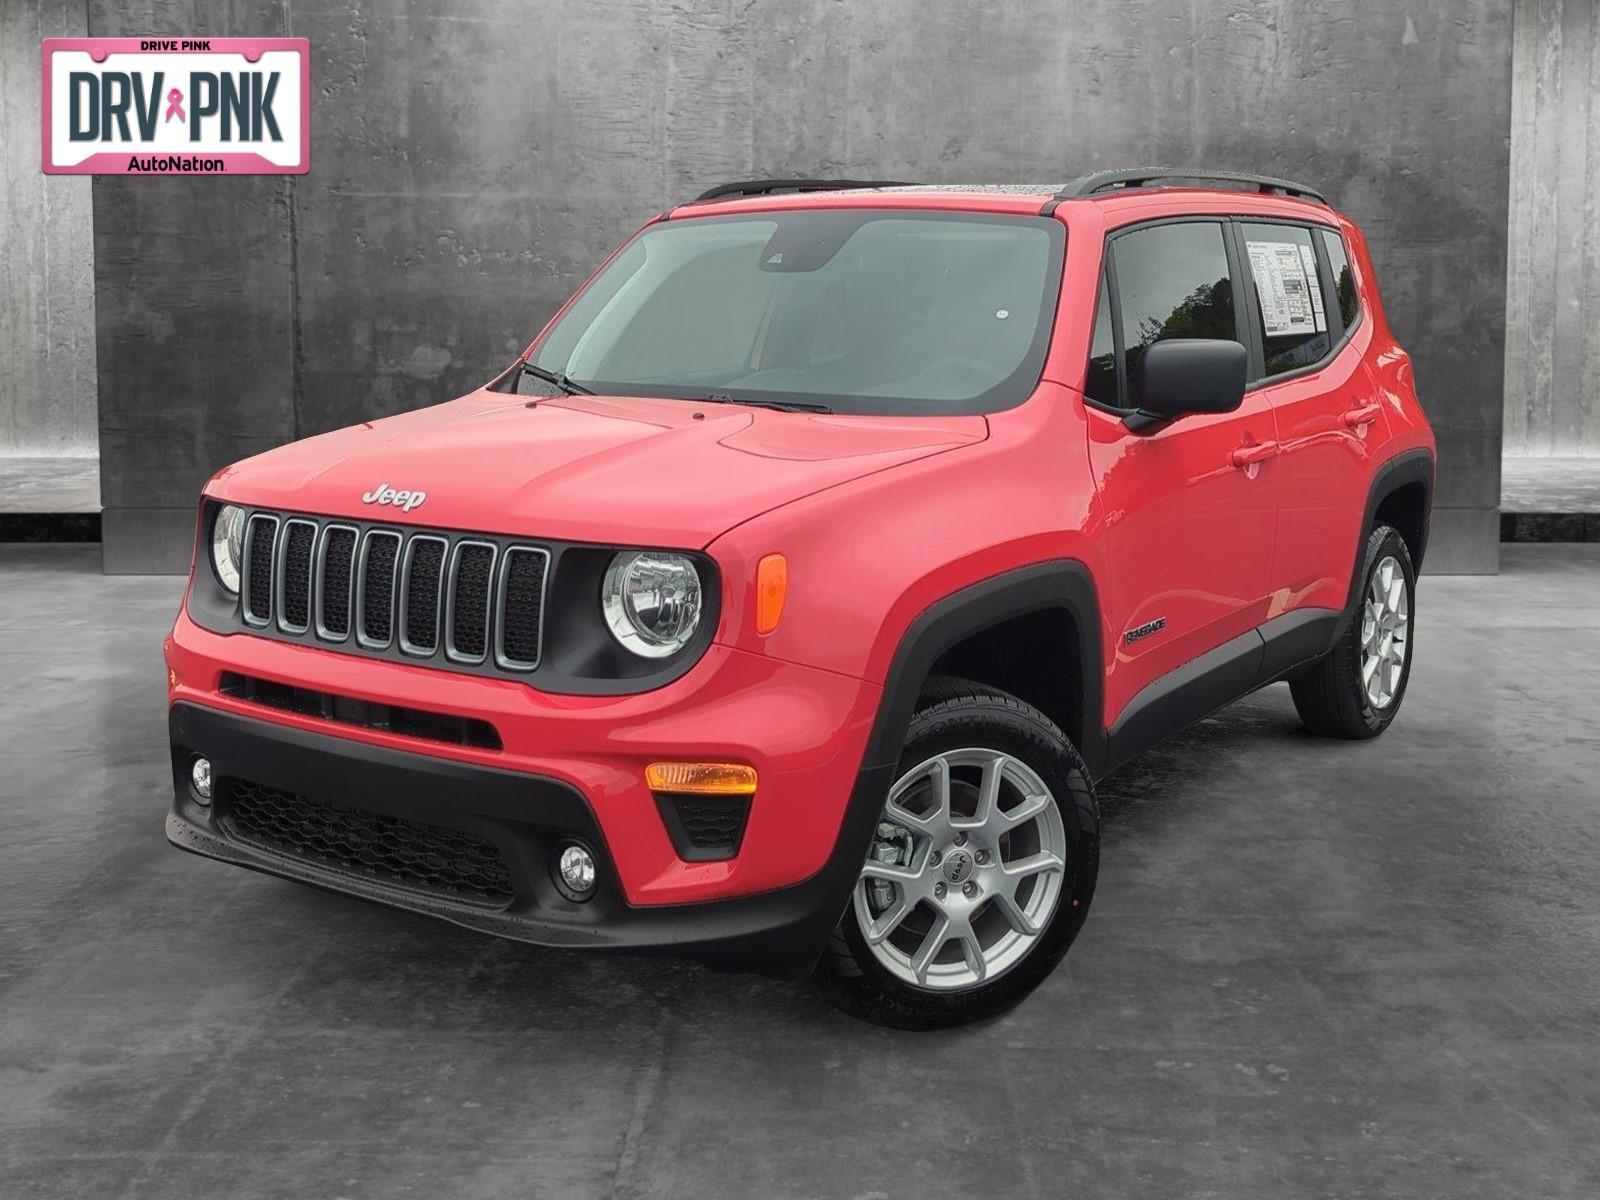 2023 Jeep Renegade Test Drive and Review - The Compact 4x4 for $30